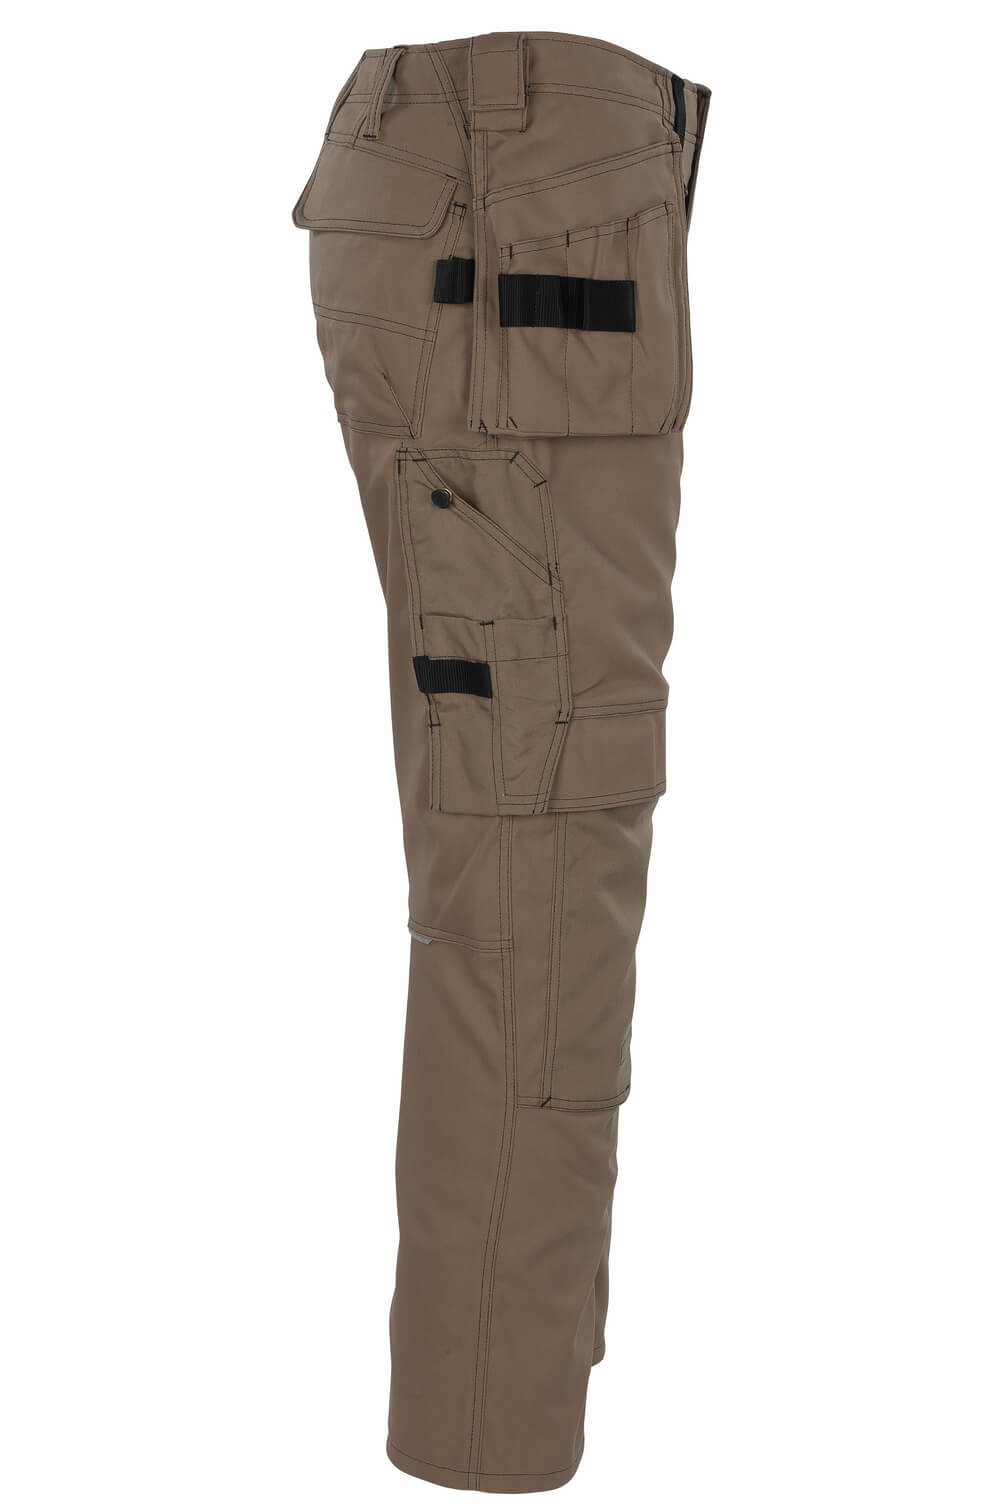 MASCOT HARDWEAR Trousers with kneepad pockets and holster pockets  08131